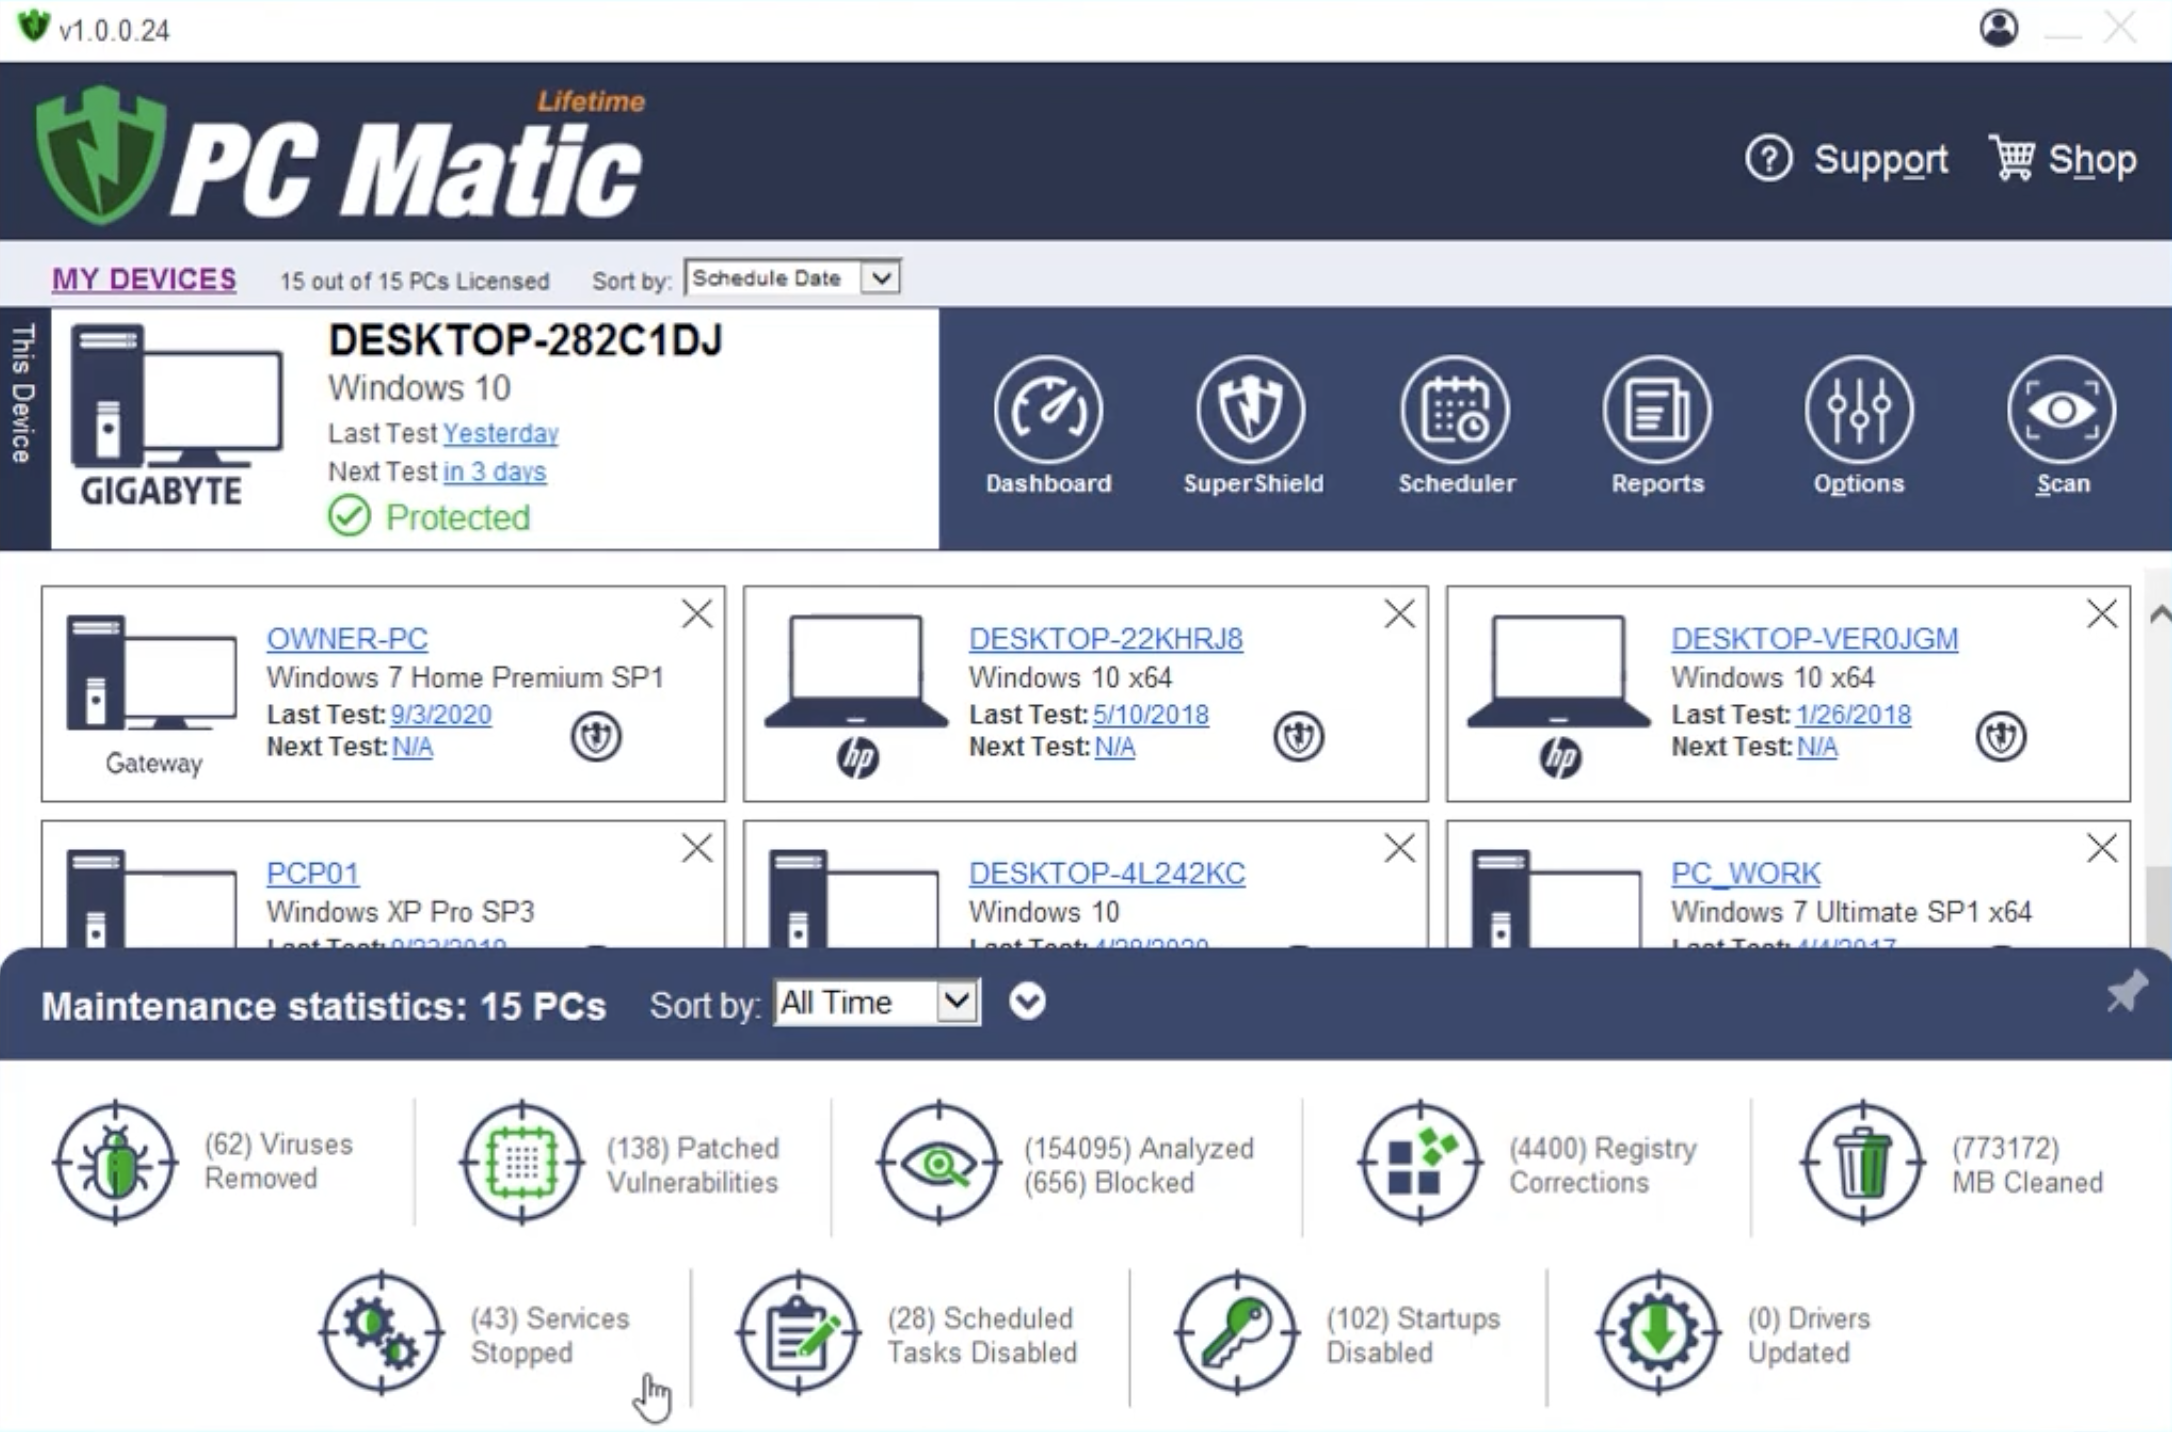 PC Matic 4.0 features a newly designed Maintenance Statistics Carousel, which makes it easier for users to understand what PC Matic has done on their device (malware removed, vulnerabilities patched, drivers updated, etc.)